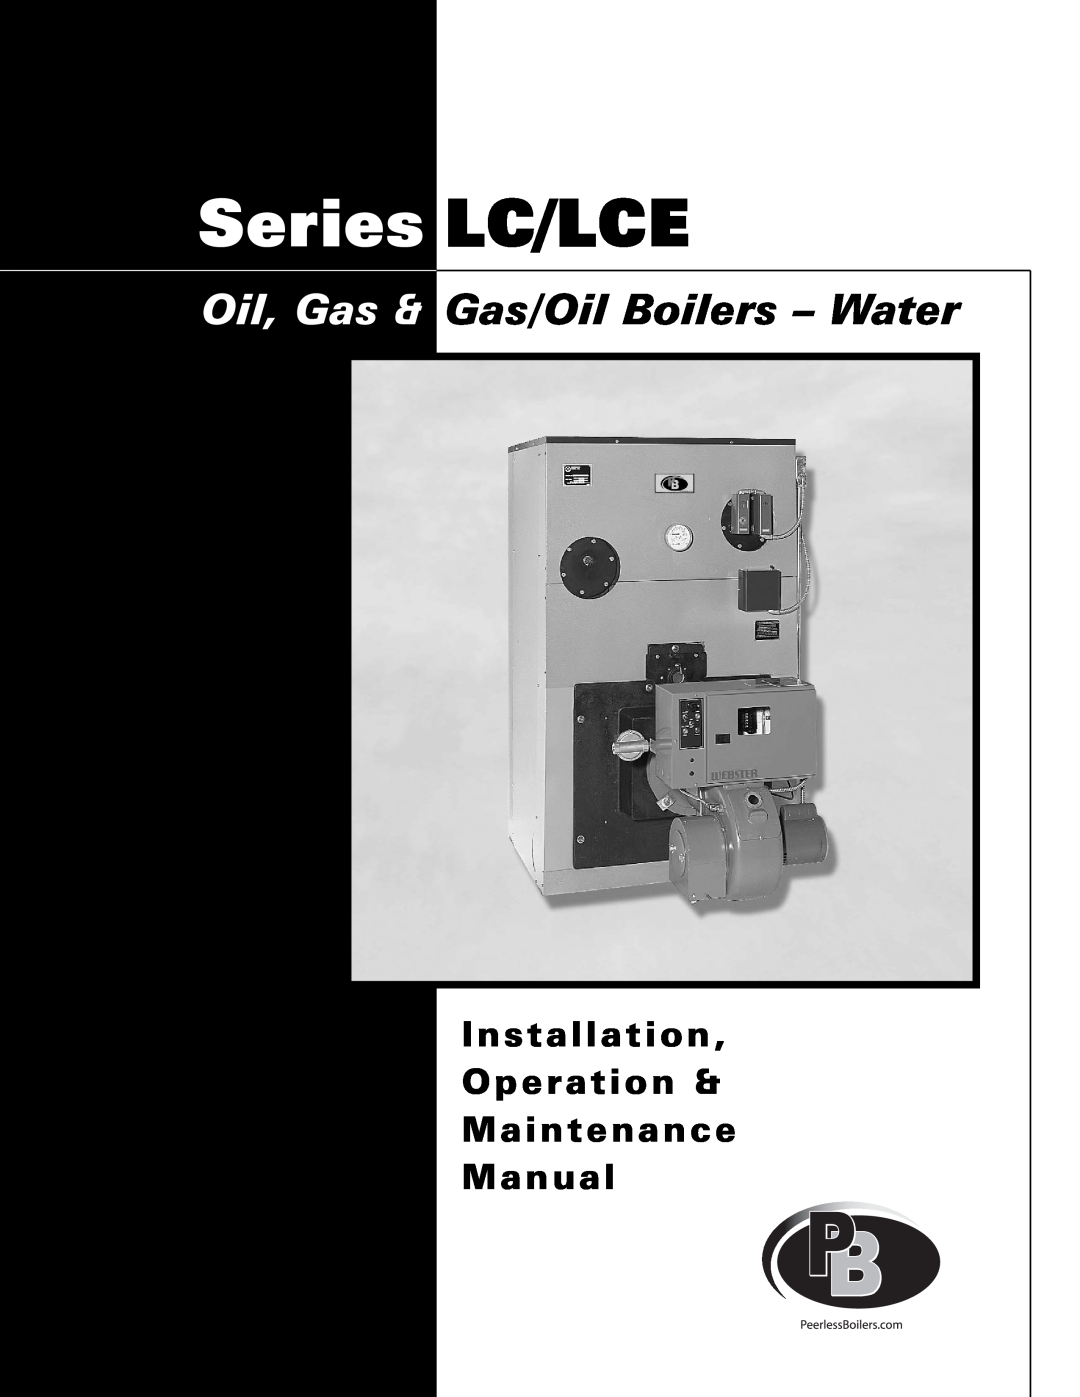 PB Heat manual Oil, Gas & Gas/Oil Boilers - Water, Installation Operation & Maintenance Manual, Series LC/LCE 